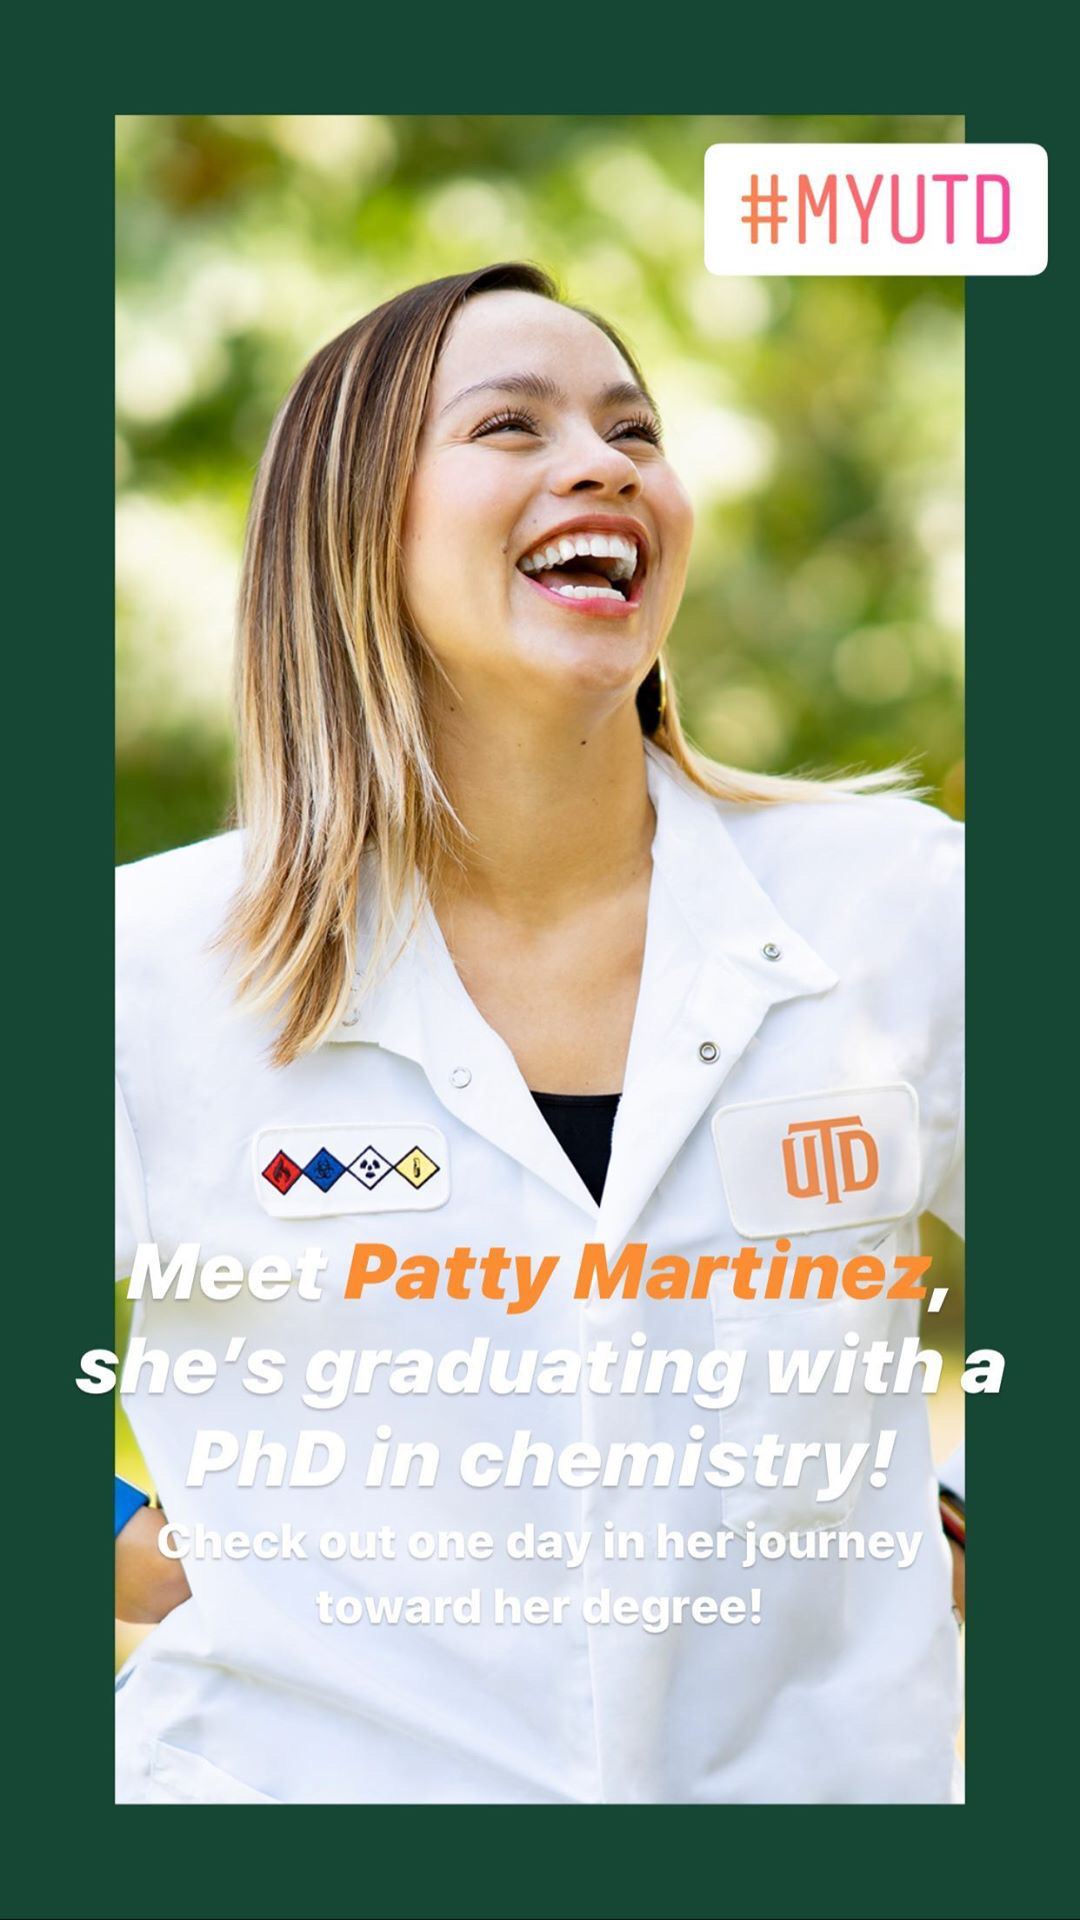 Patty wearing a lab coat, standing and smiling outdoors.